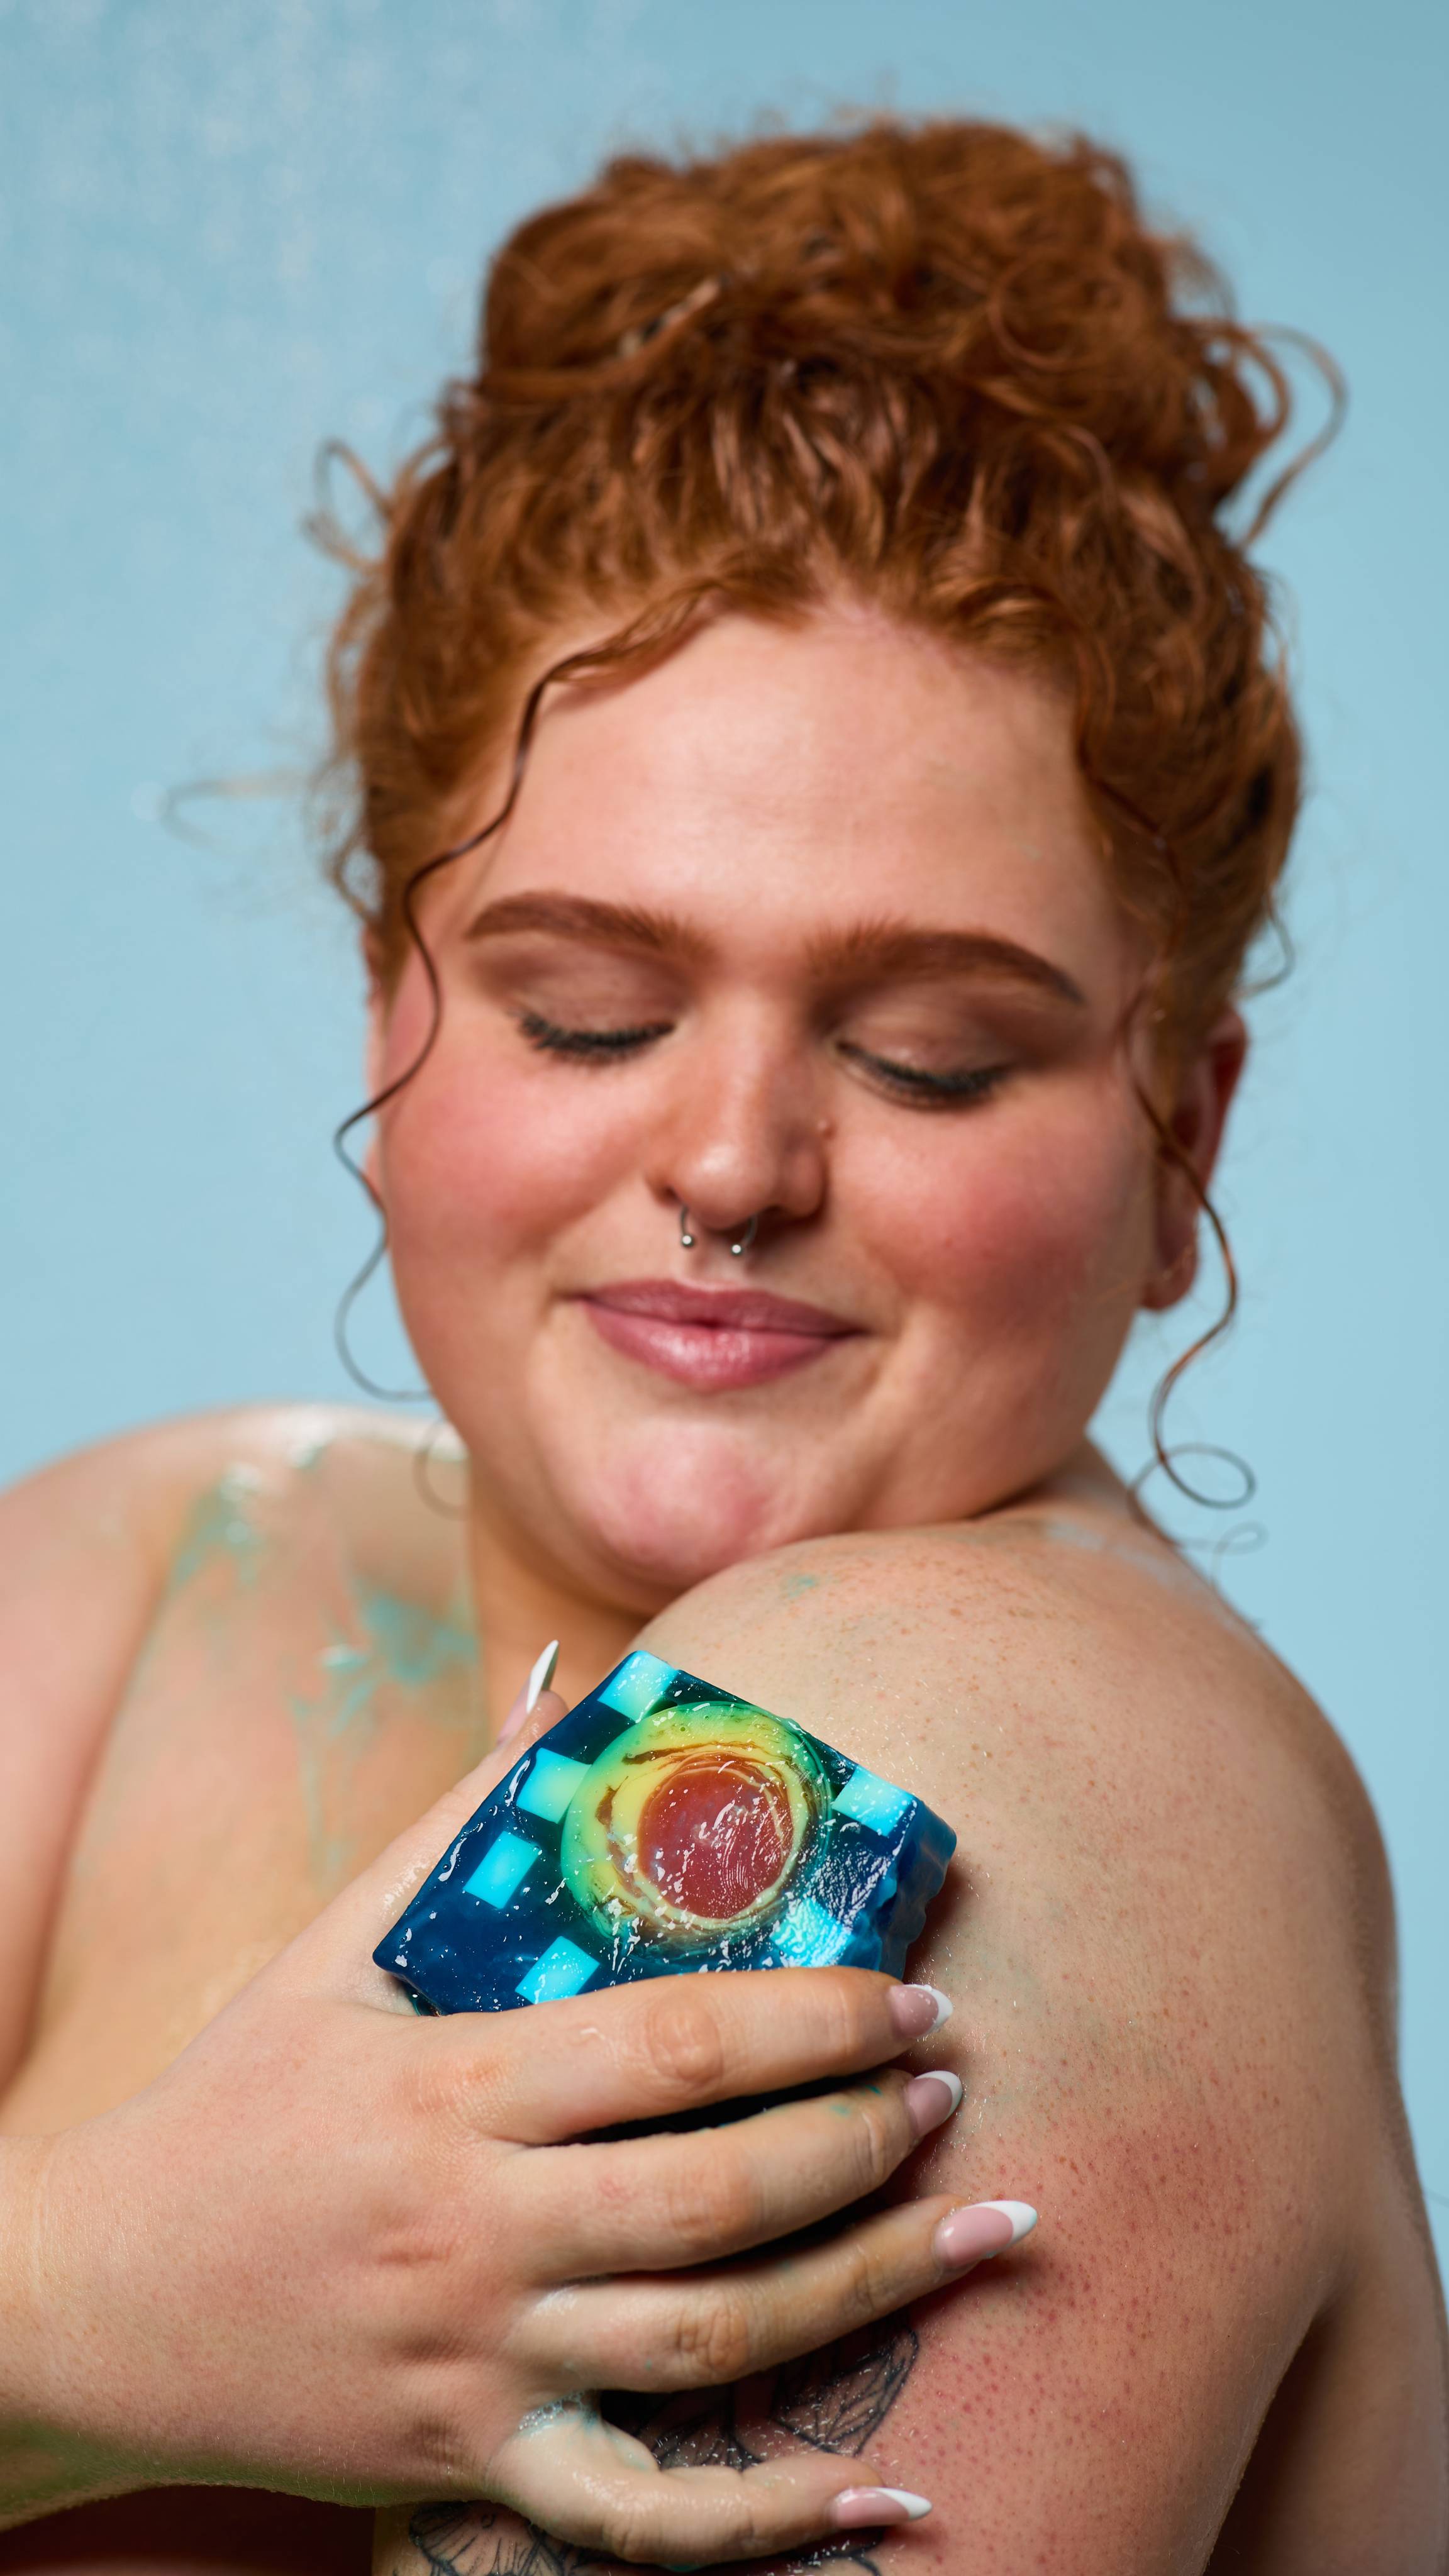 The model is standing under running shower water on a pale blue background. Their curly hair is tied up as they lather their shoulder with the Alban Arthan soap. 